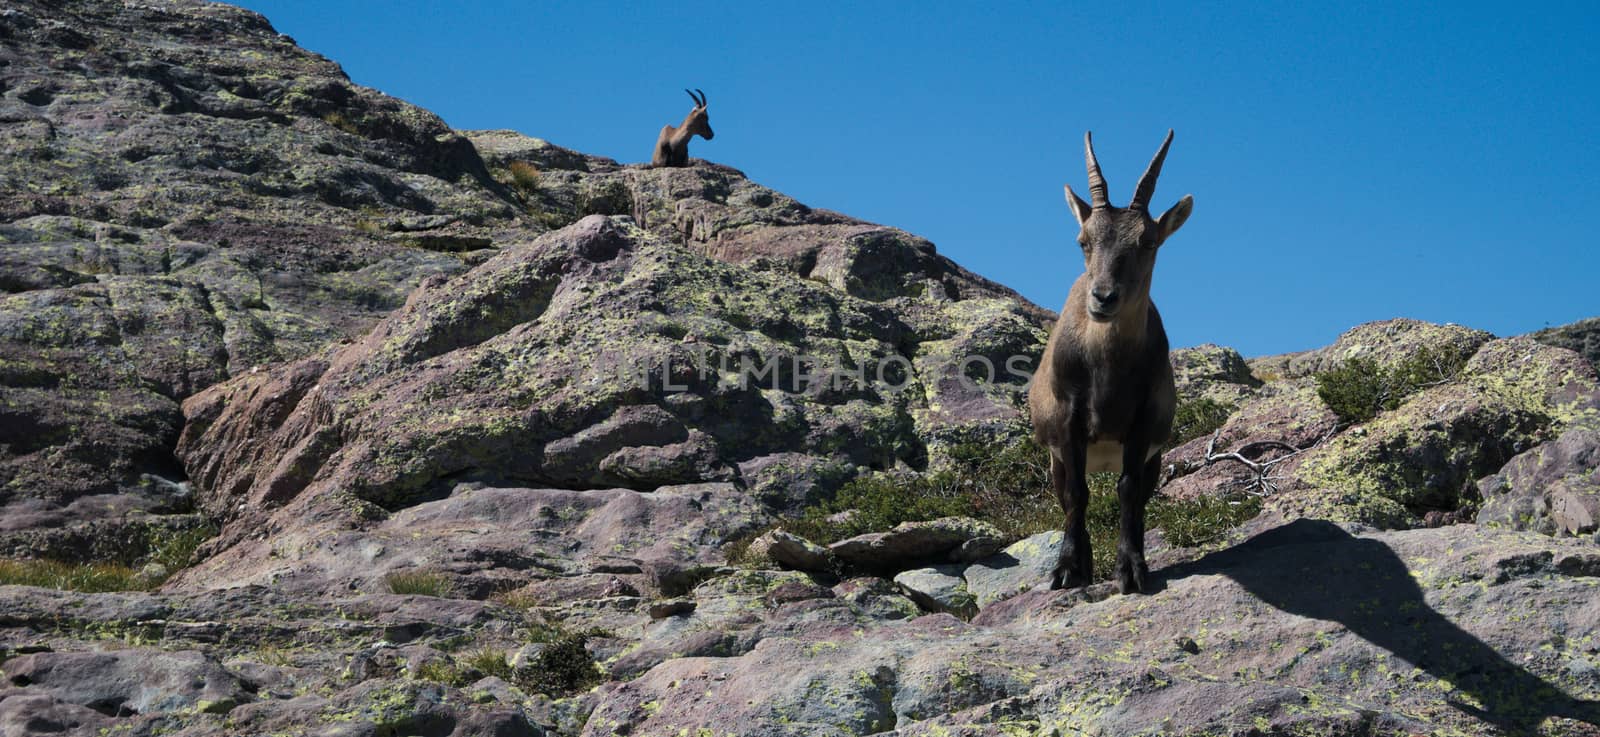 Alpine ibex looking at the camera on top of a peak
 by gigidread